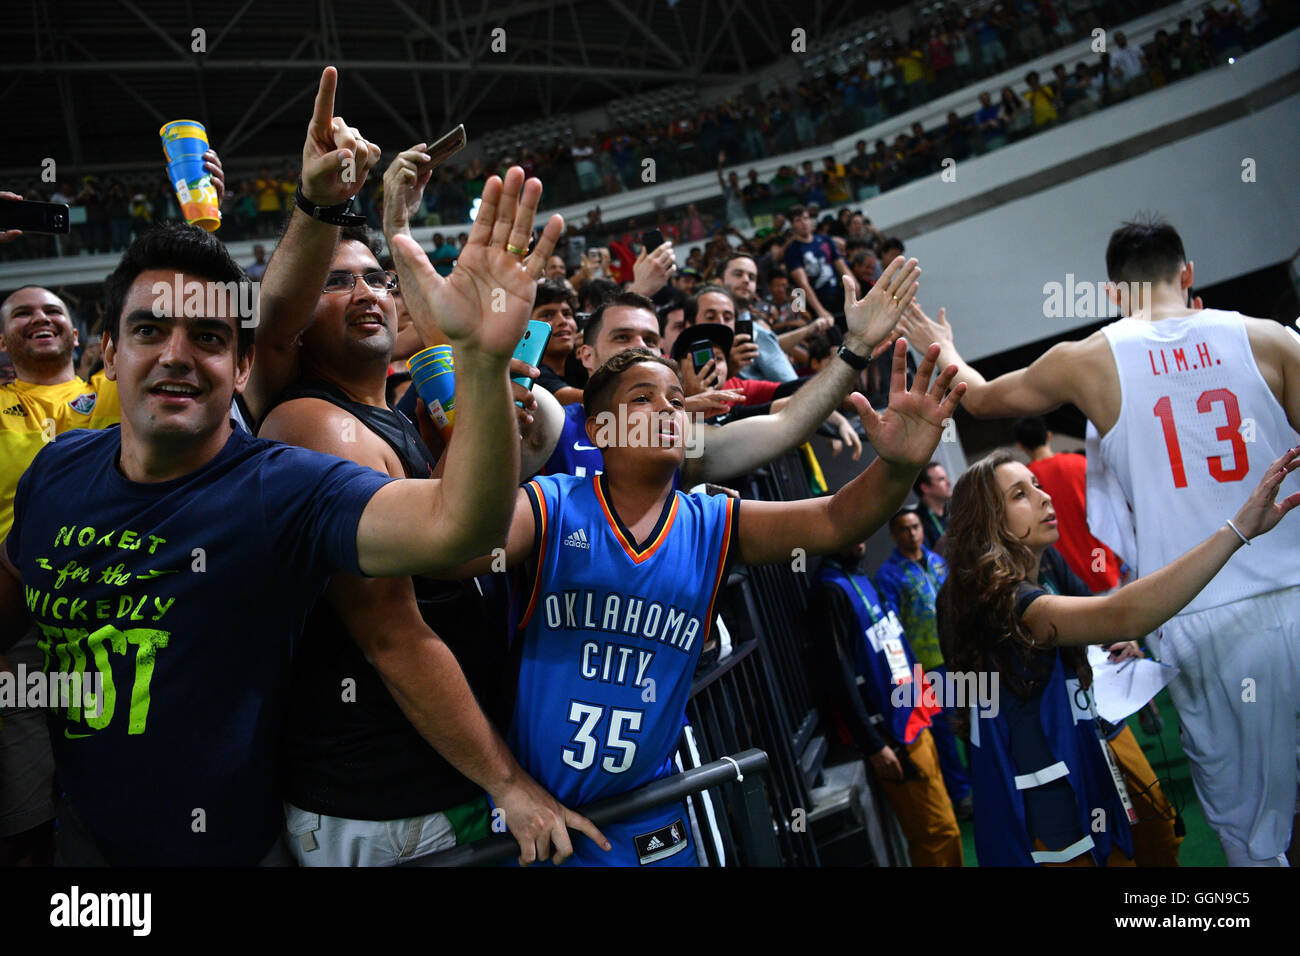 Fans cheer in the stands next to Muhao Li (R) of China after the Basketball Men's Preliminary Round Group A match of the Rio 2016 Olympic Games at the Carioca Arena 1, Rio de Janeiro, Brazil, 6 August 2016. Photo: Lukas Schulze/dpa Stock Photo